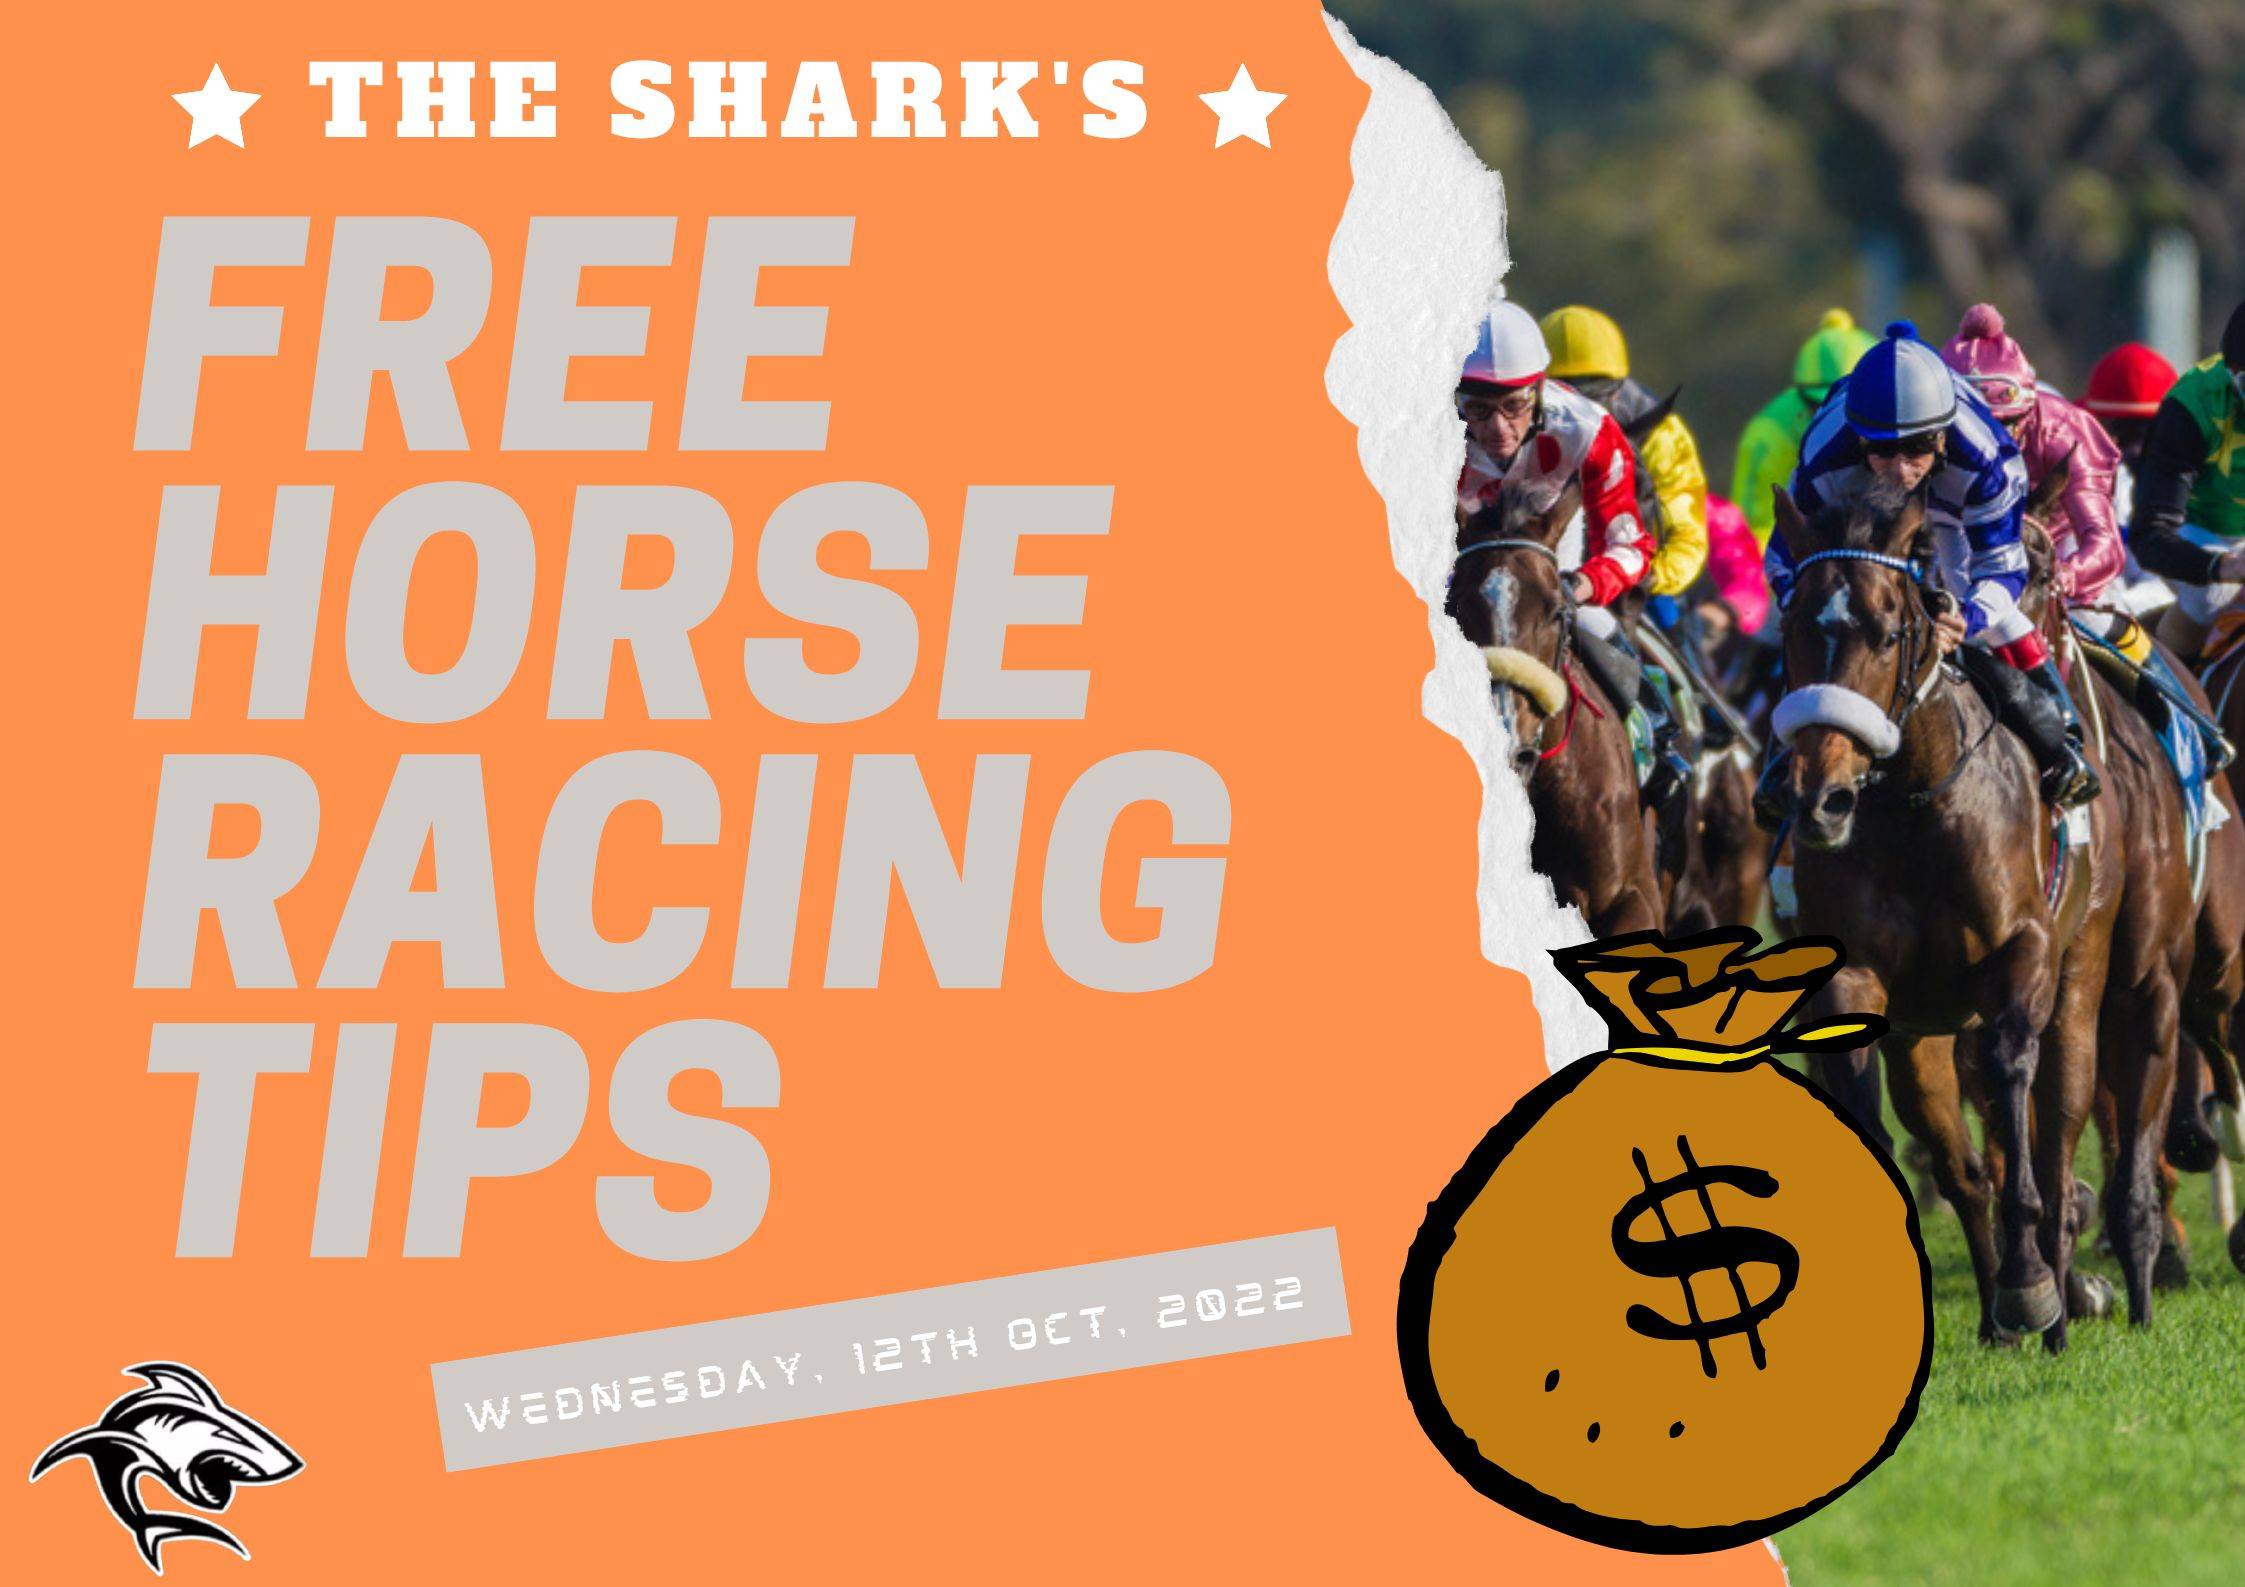 Free Horse Racing Tips - 12th Oct